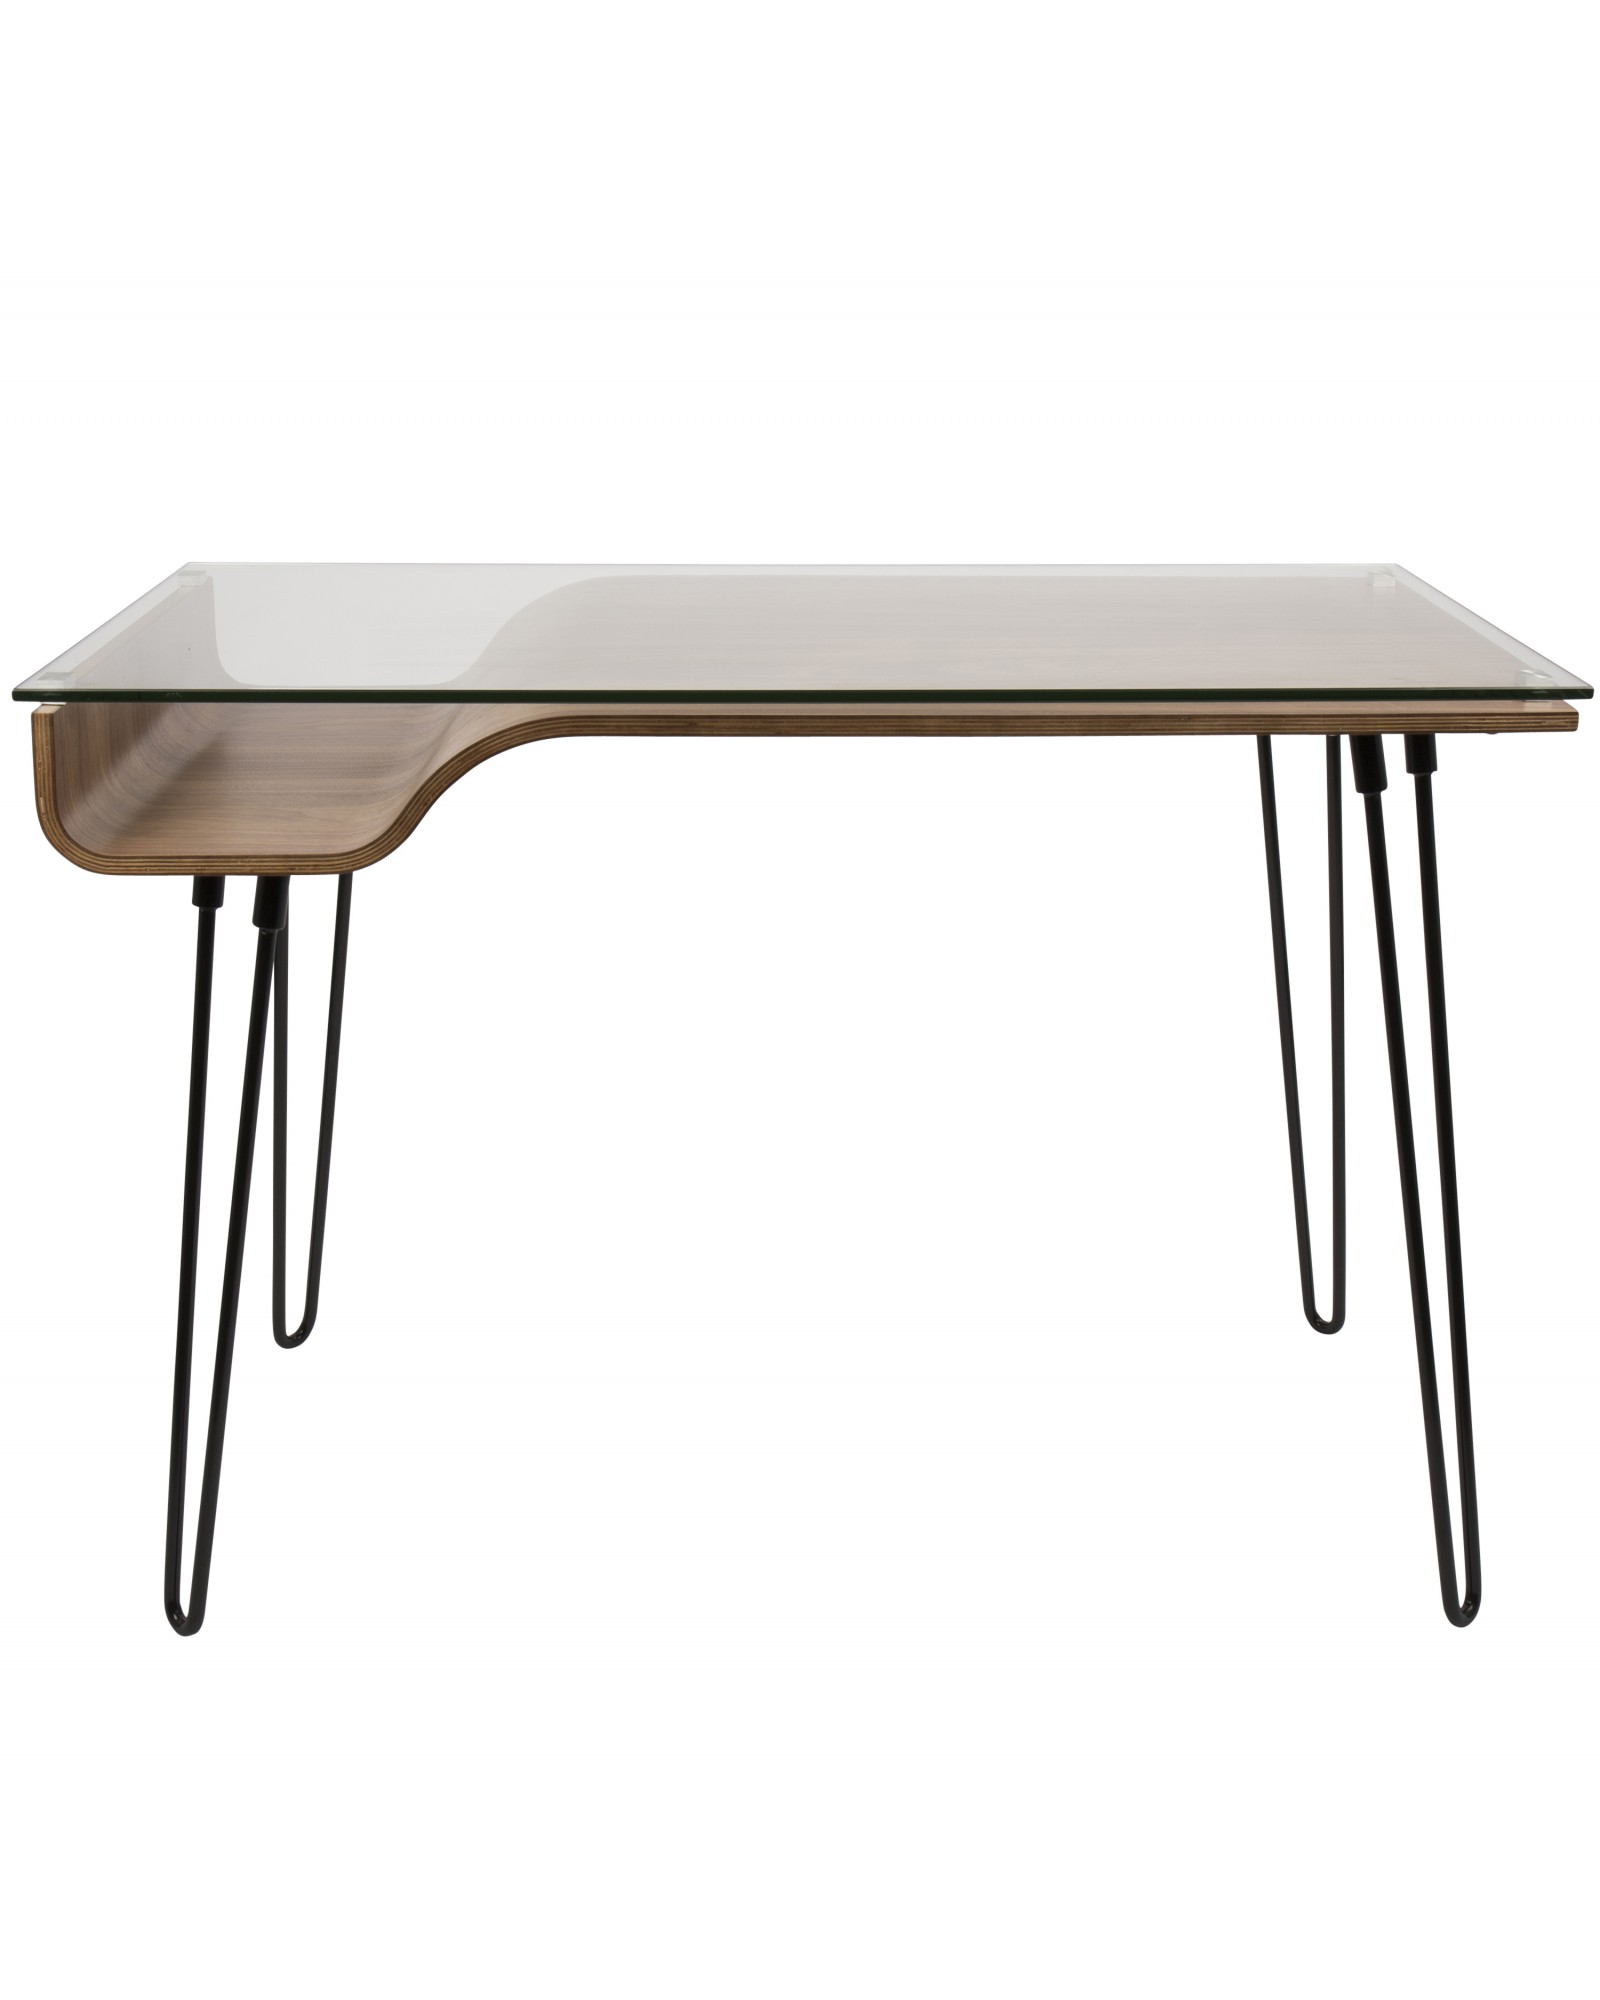 Avery Mid-Century Modern Desk in Walnut Wood, Clear Glass, and Black Metal